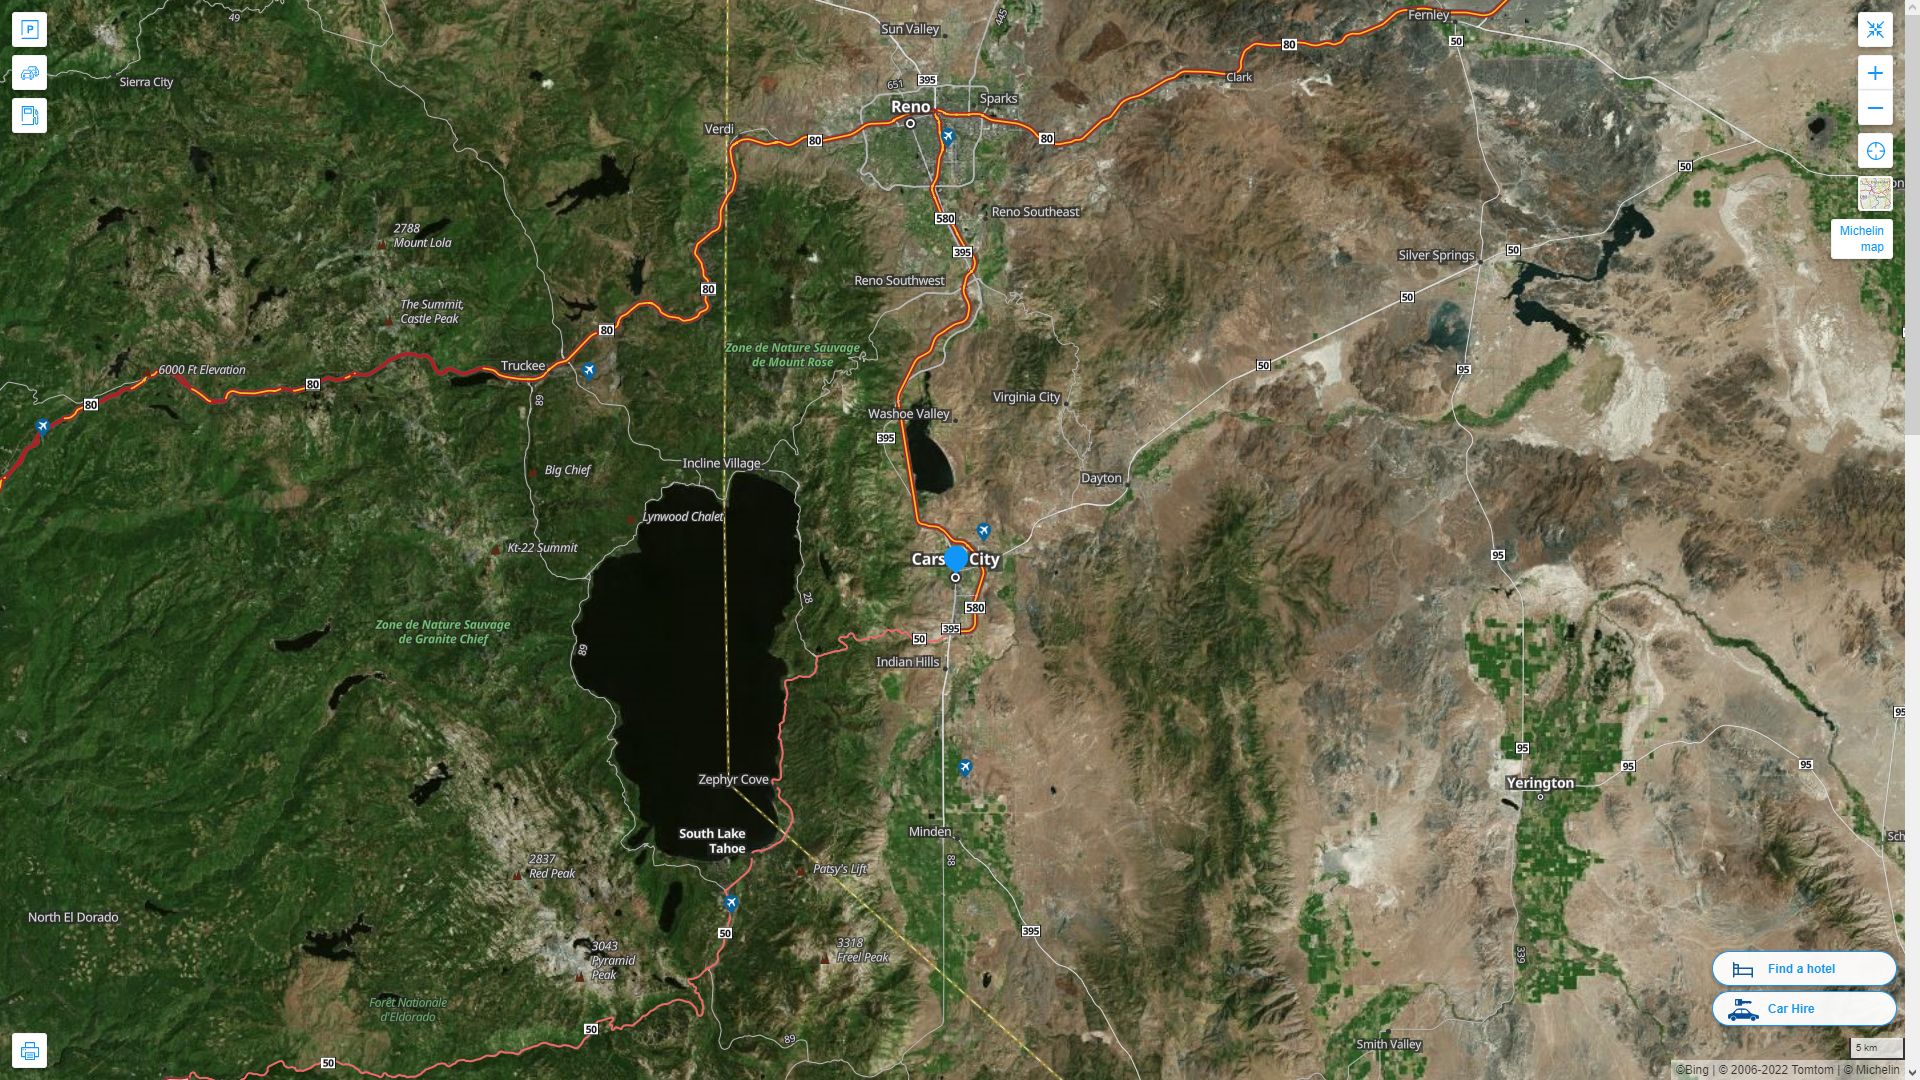 Carson City Nevada Highway and Road Map with Satellite View